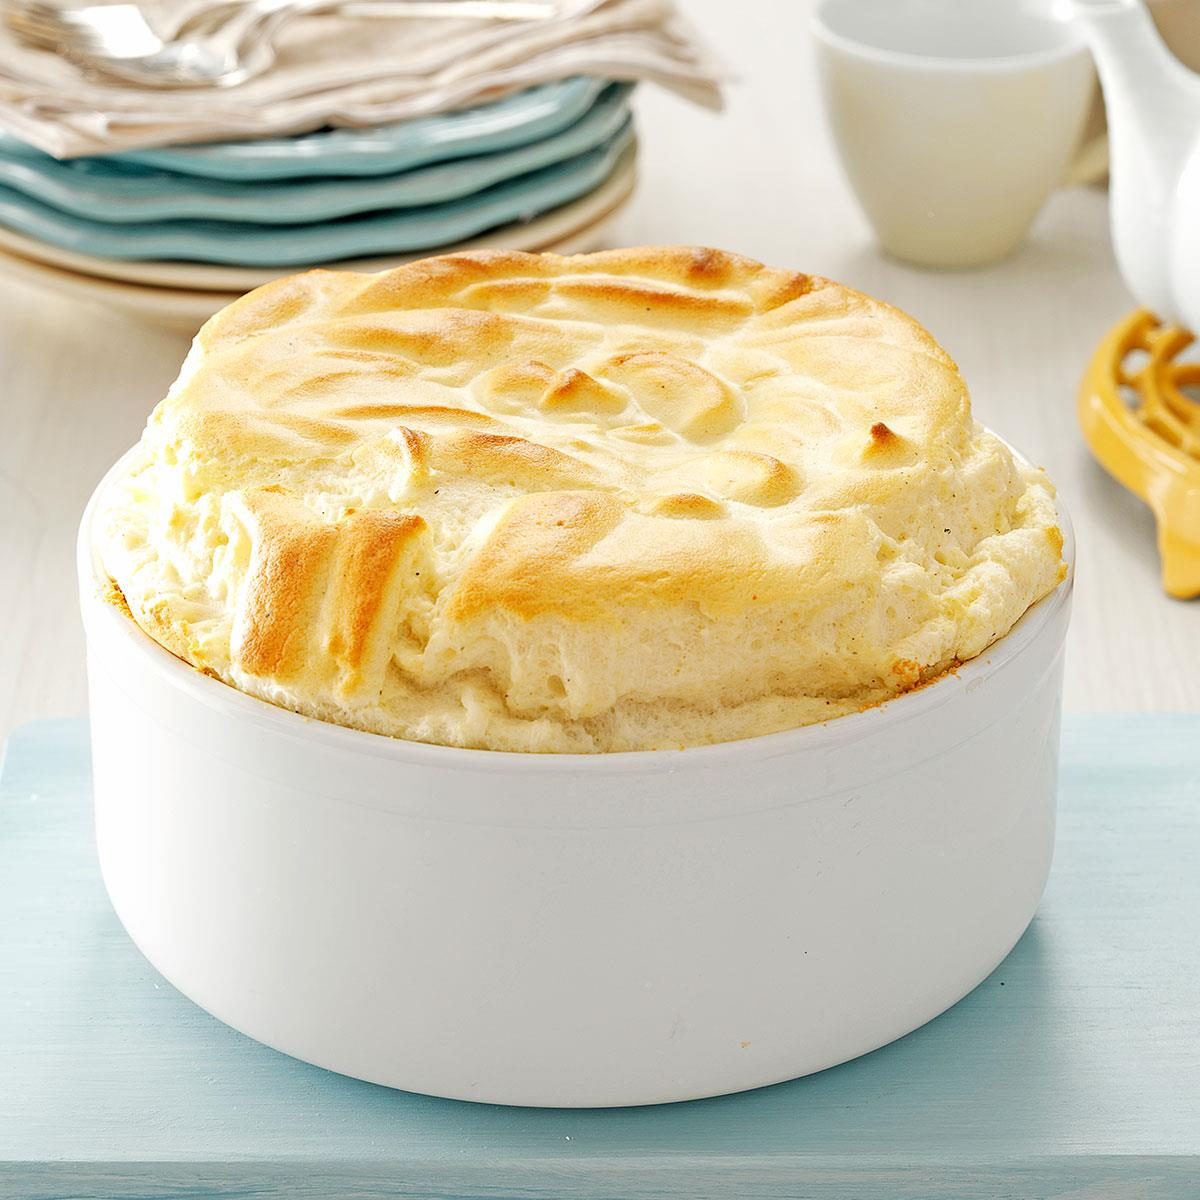 Blue Cheese Souffle Recipe | Taste of Home